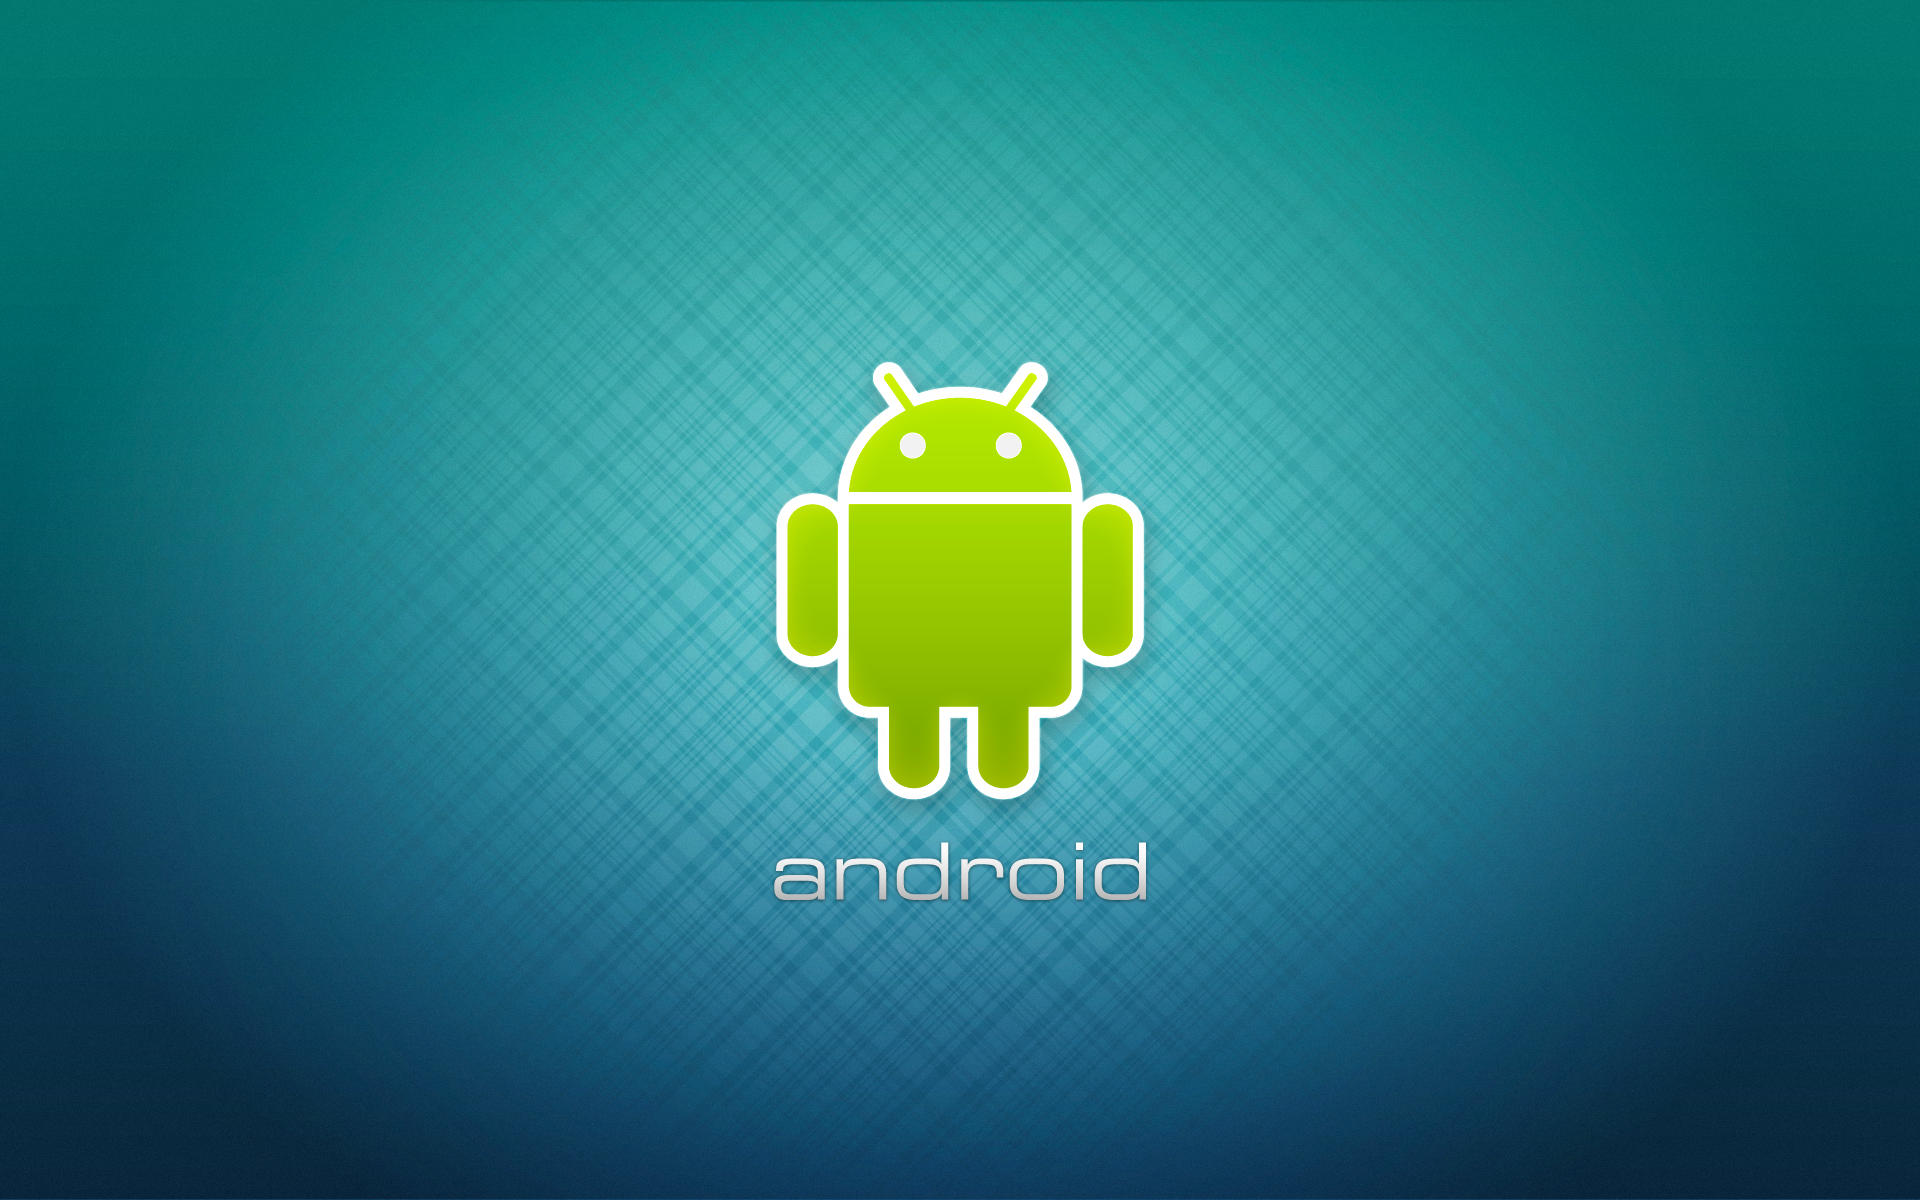 Wallpaper Android Phone Android Today